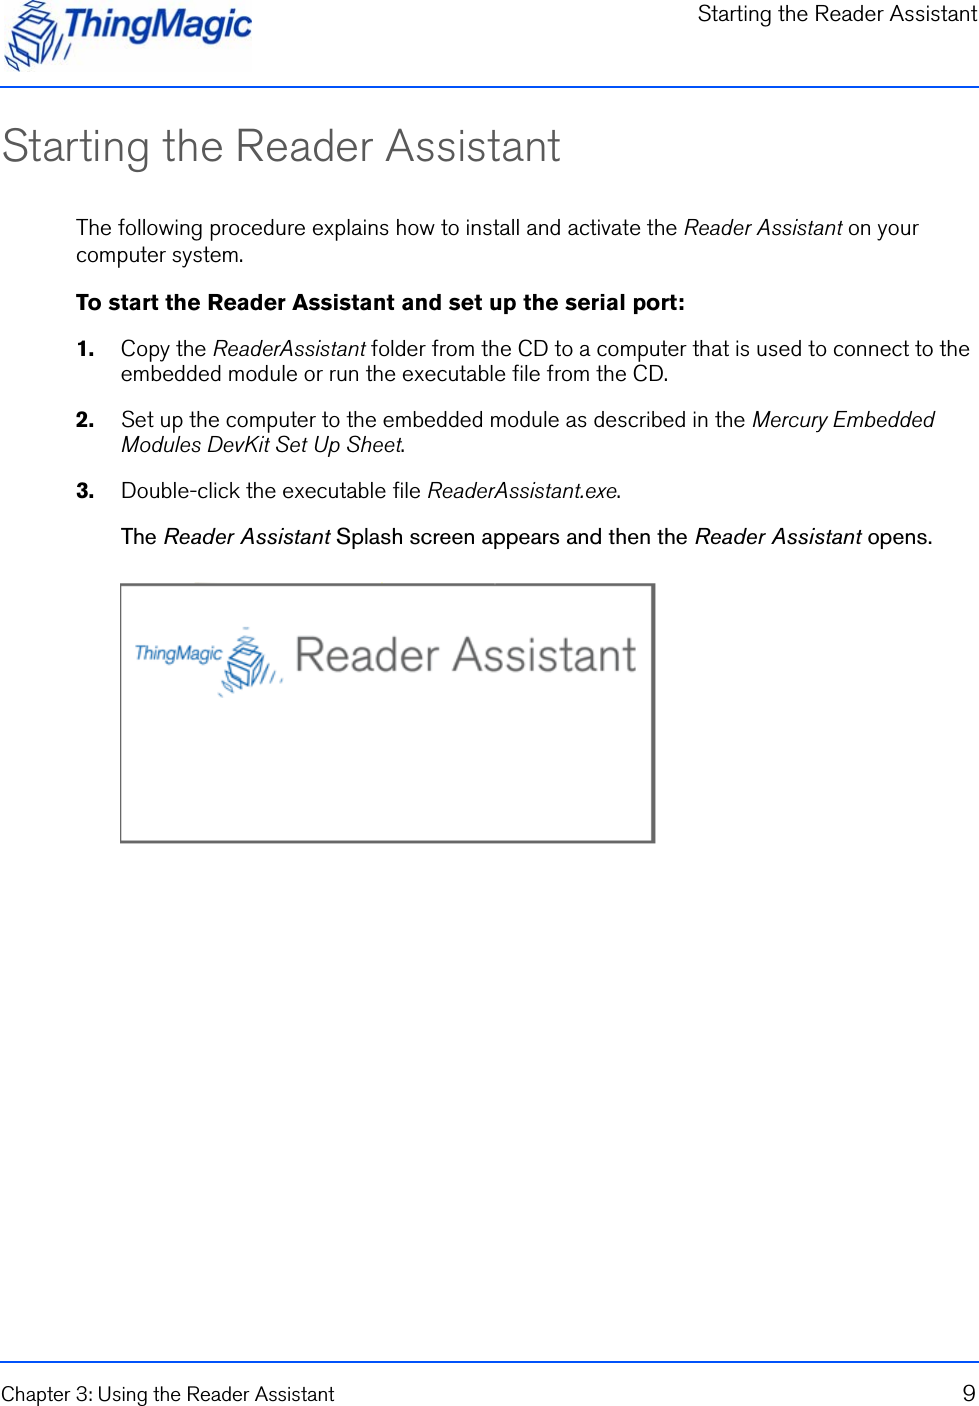 Starting the Reader AssistantChapter 3: Using the Reader Assistant 9Starting the Reader AssistantThe following procedure explains how to install and activate the Reader Assistant on your computer system.To start the Reader Assistant and set up the serial port:1.    Copy the ReaderAssistant folder from the CD to a computer that is used to connect to the embedded module or run the executable file from the CD.2.    Set up the computer to the embedded module as described in the Mercury Embedded Modules DevKit Set Up Sheet.3.    Double-click the executable file ReaderAssistant.exe.The Reader Assistant Splash screen appears and then the Reader Assistant opens.